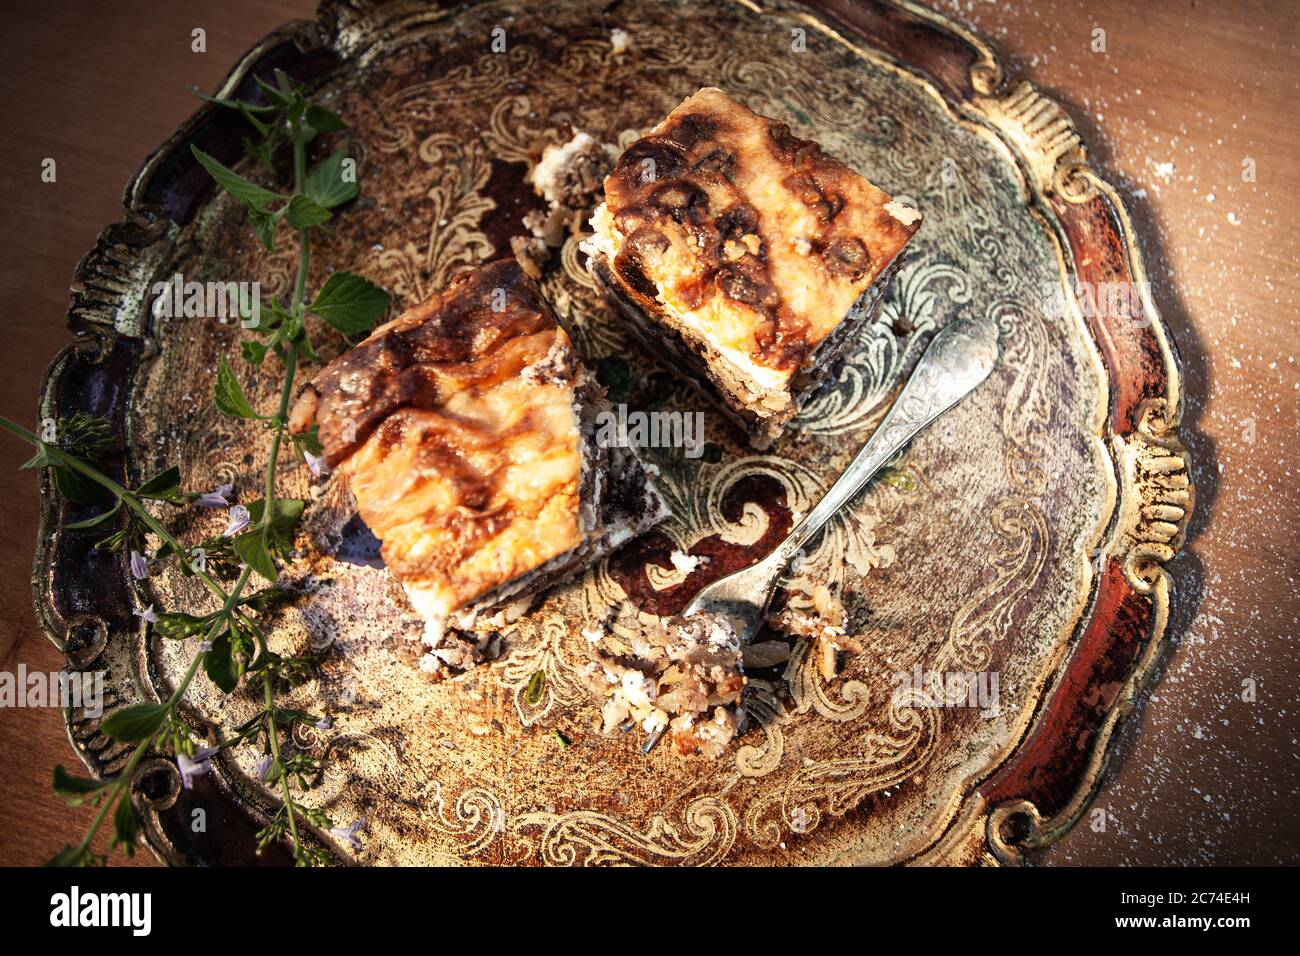 Typical Slovenian dessert with cream poppy seeds, in the studio on an elegant wooden tray. Stock Photo